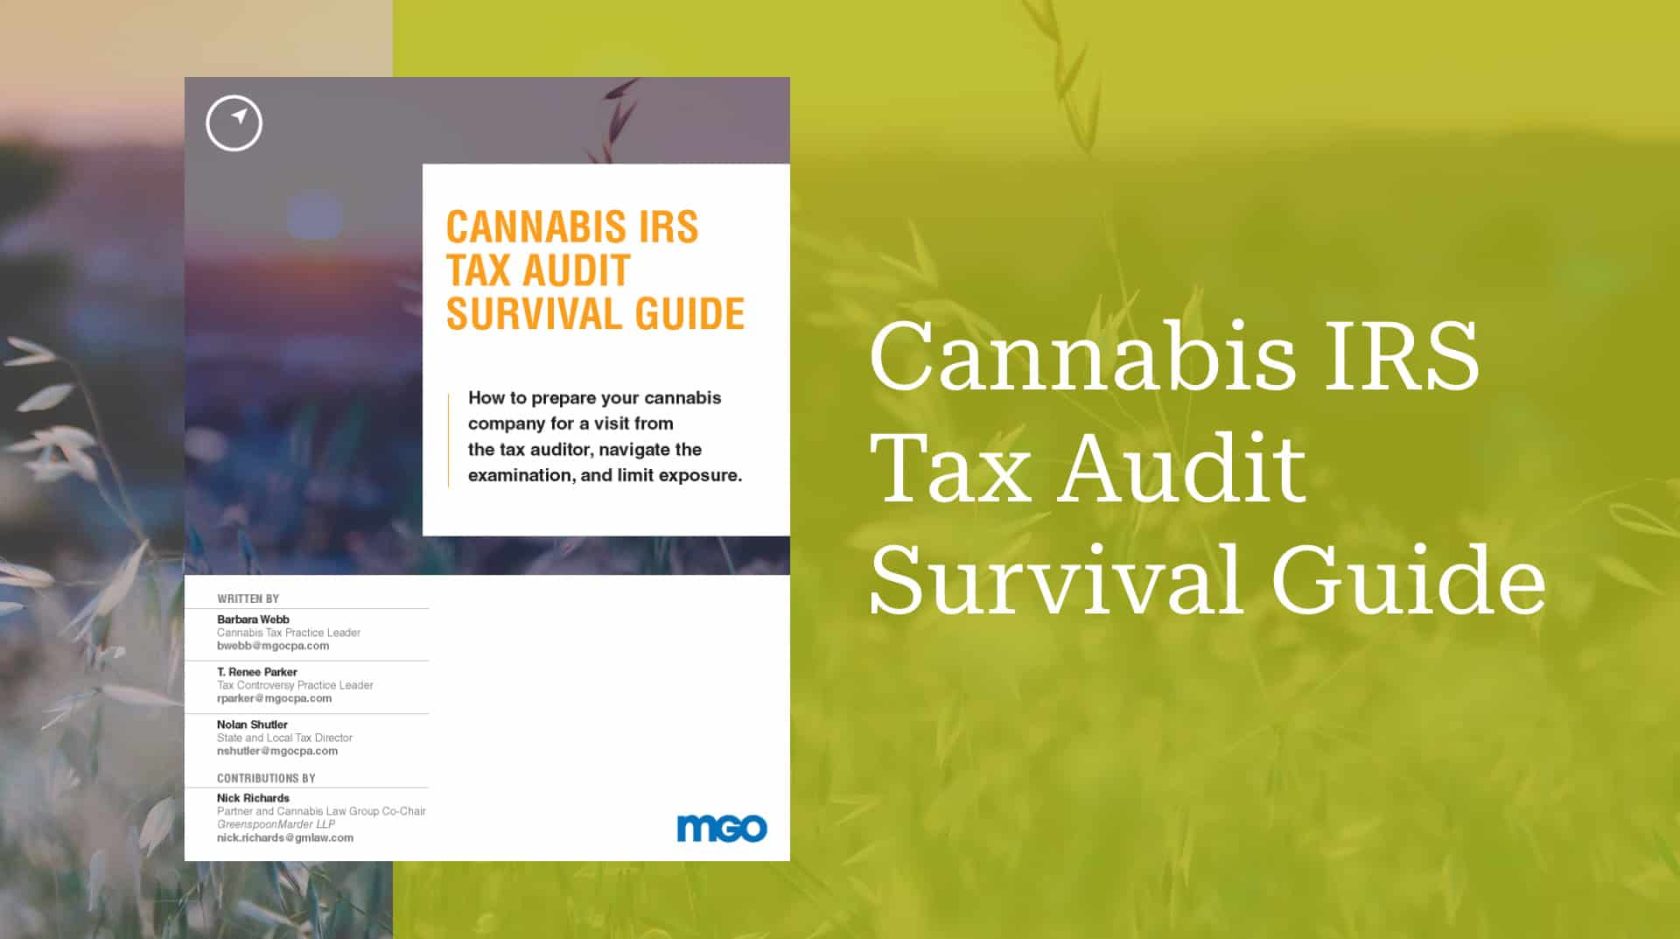 Cannabis IRS Tax Audit Survival Guide.